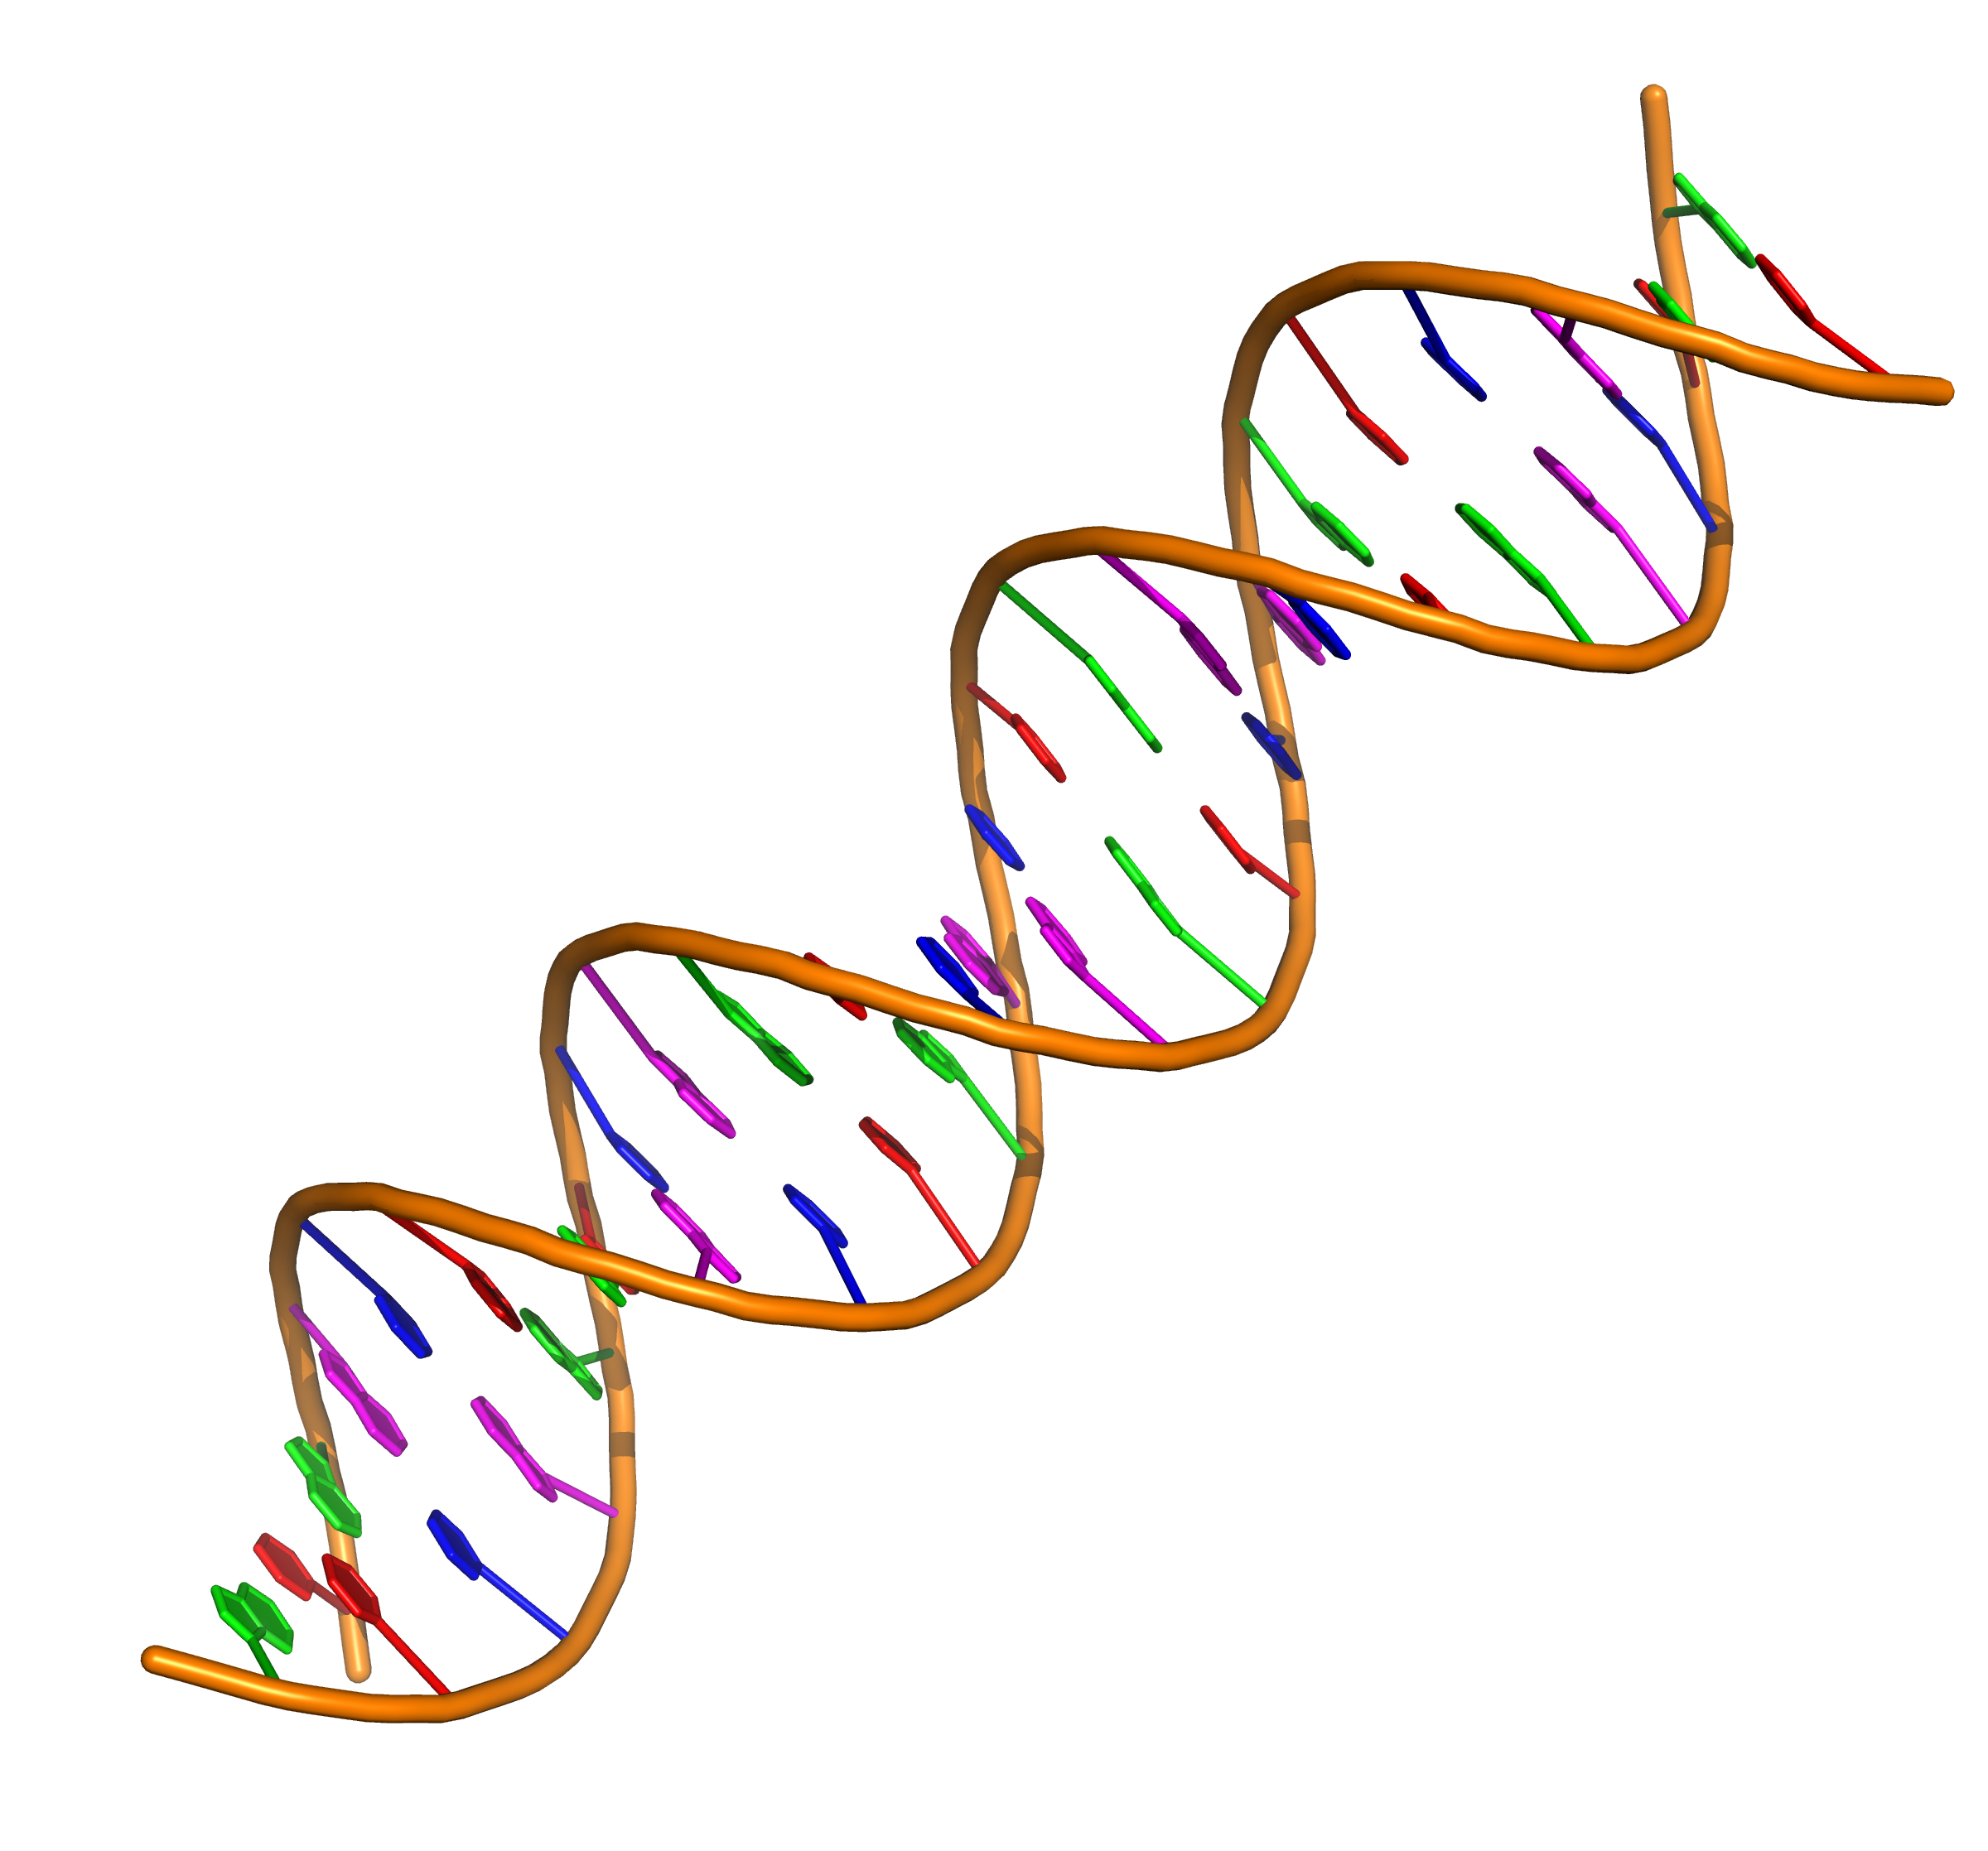 Nucleic Acid Double Helix Wikipedia